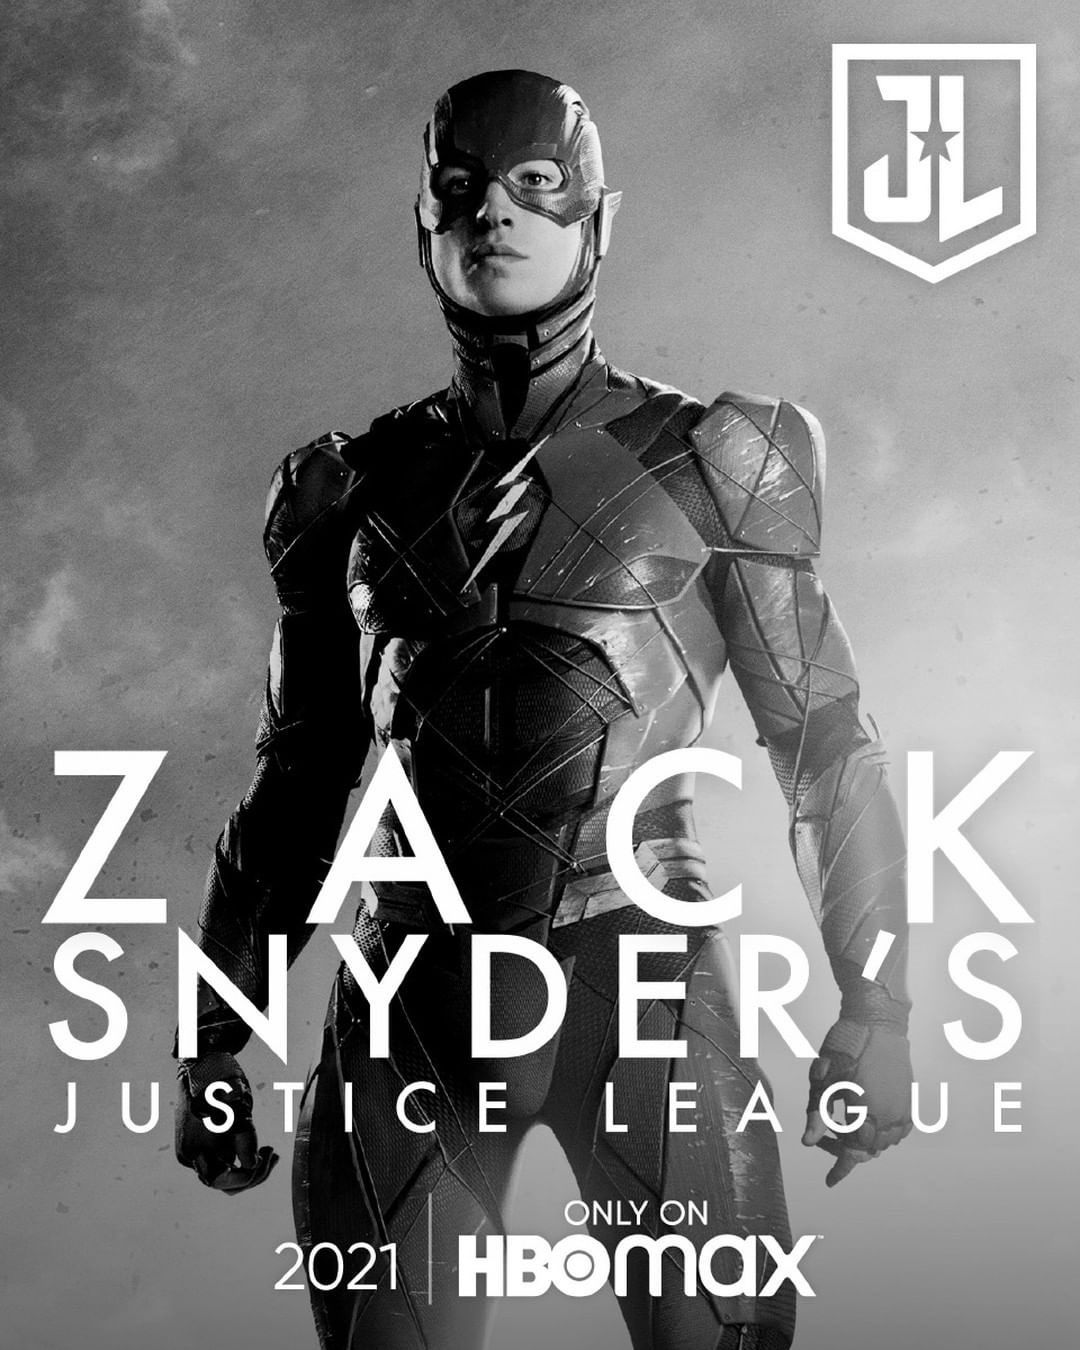 Zack Snyder's Justice League Poster Miller as The Flash